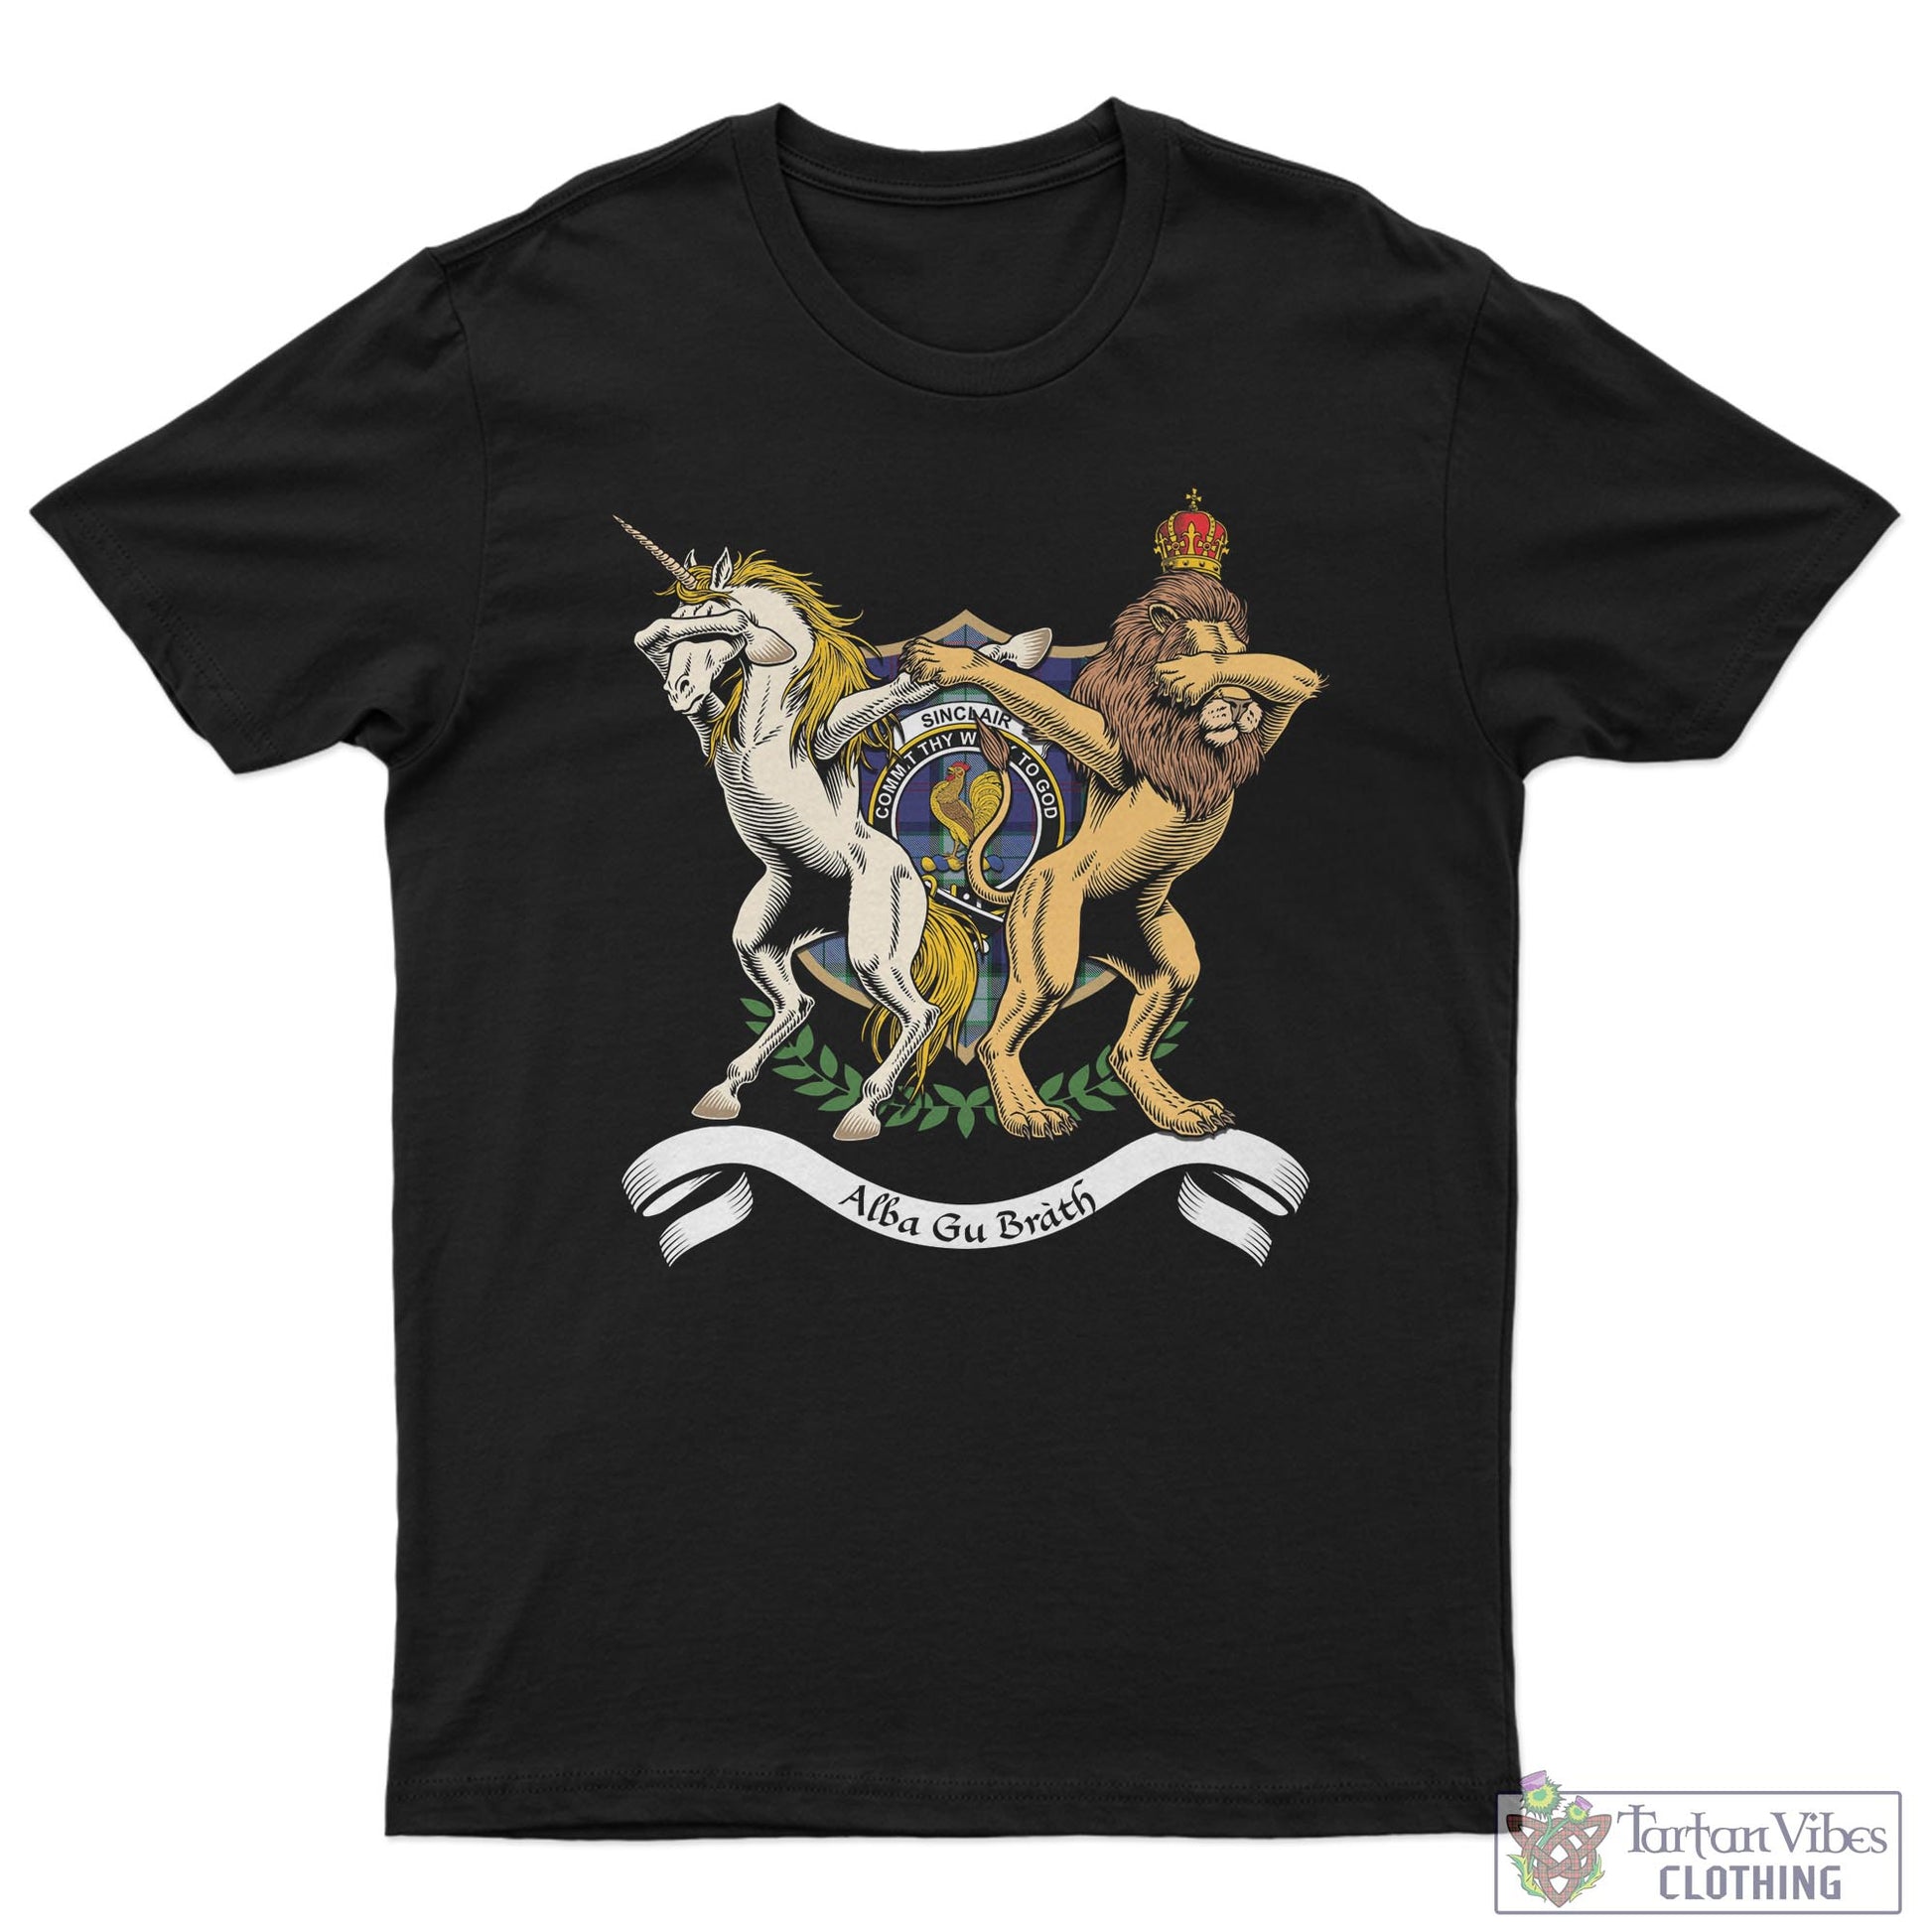 Tartan Vibes Clothing Sinclair Dress Family Crest Cotton Men's T-Shirt with Scotland Royal Coat Of Arm Funny Style